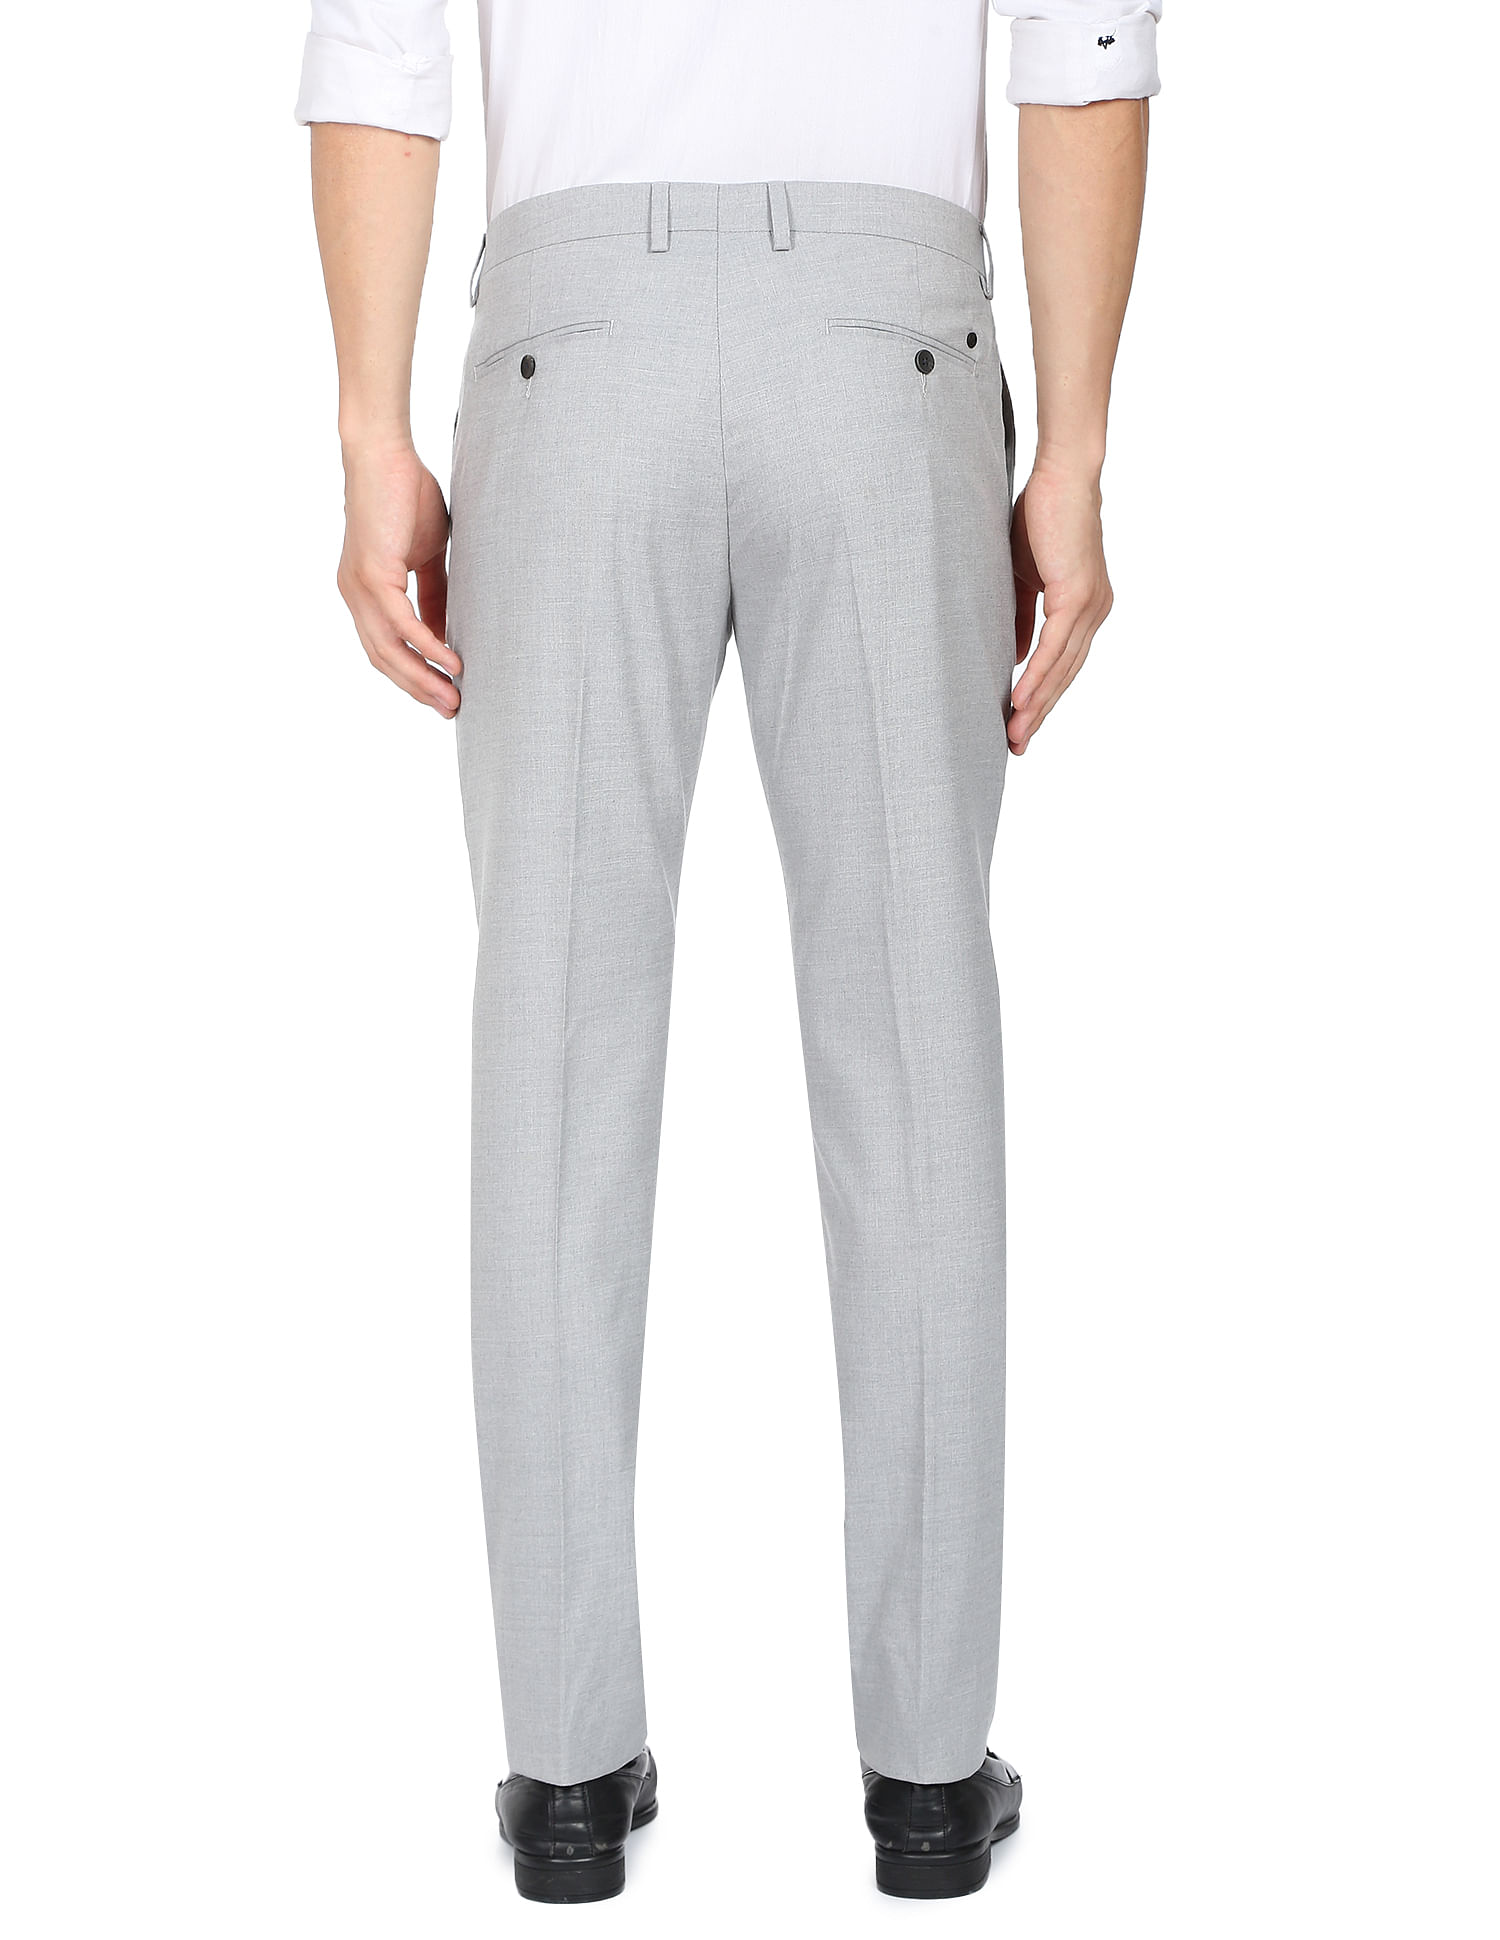 Slim Fit Mid Grey Trousers | Buy Online at Moss